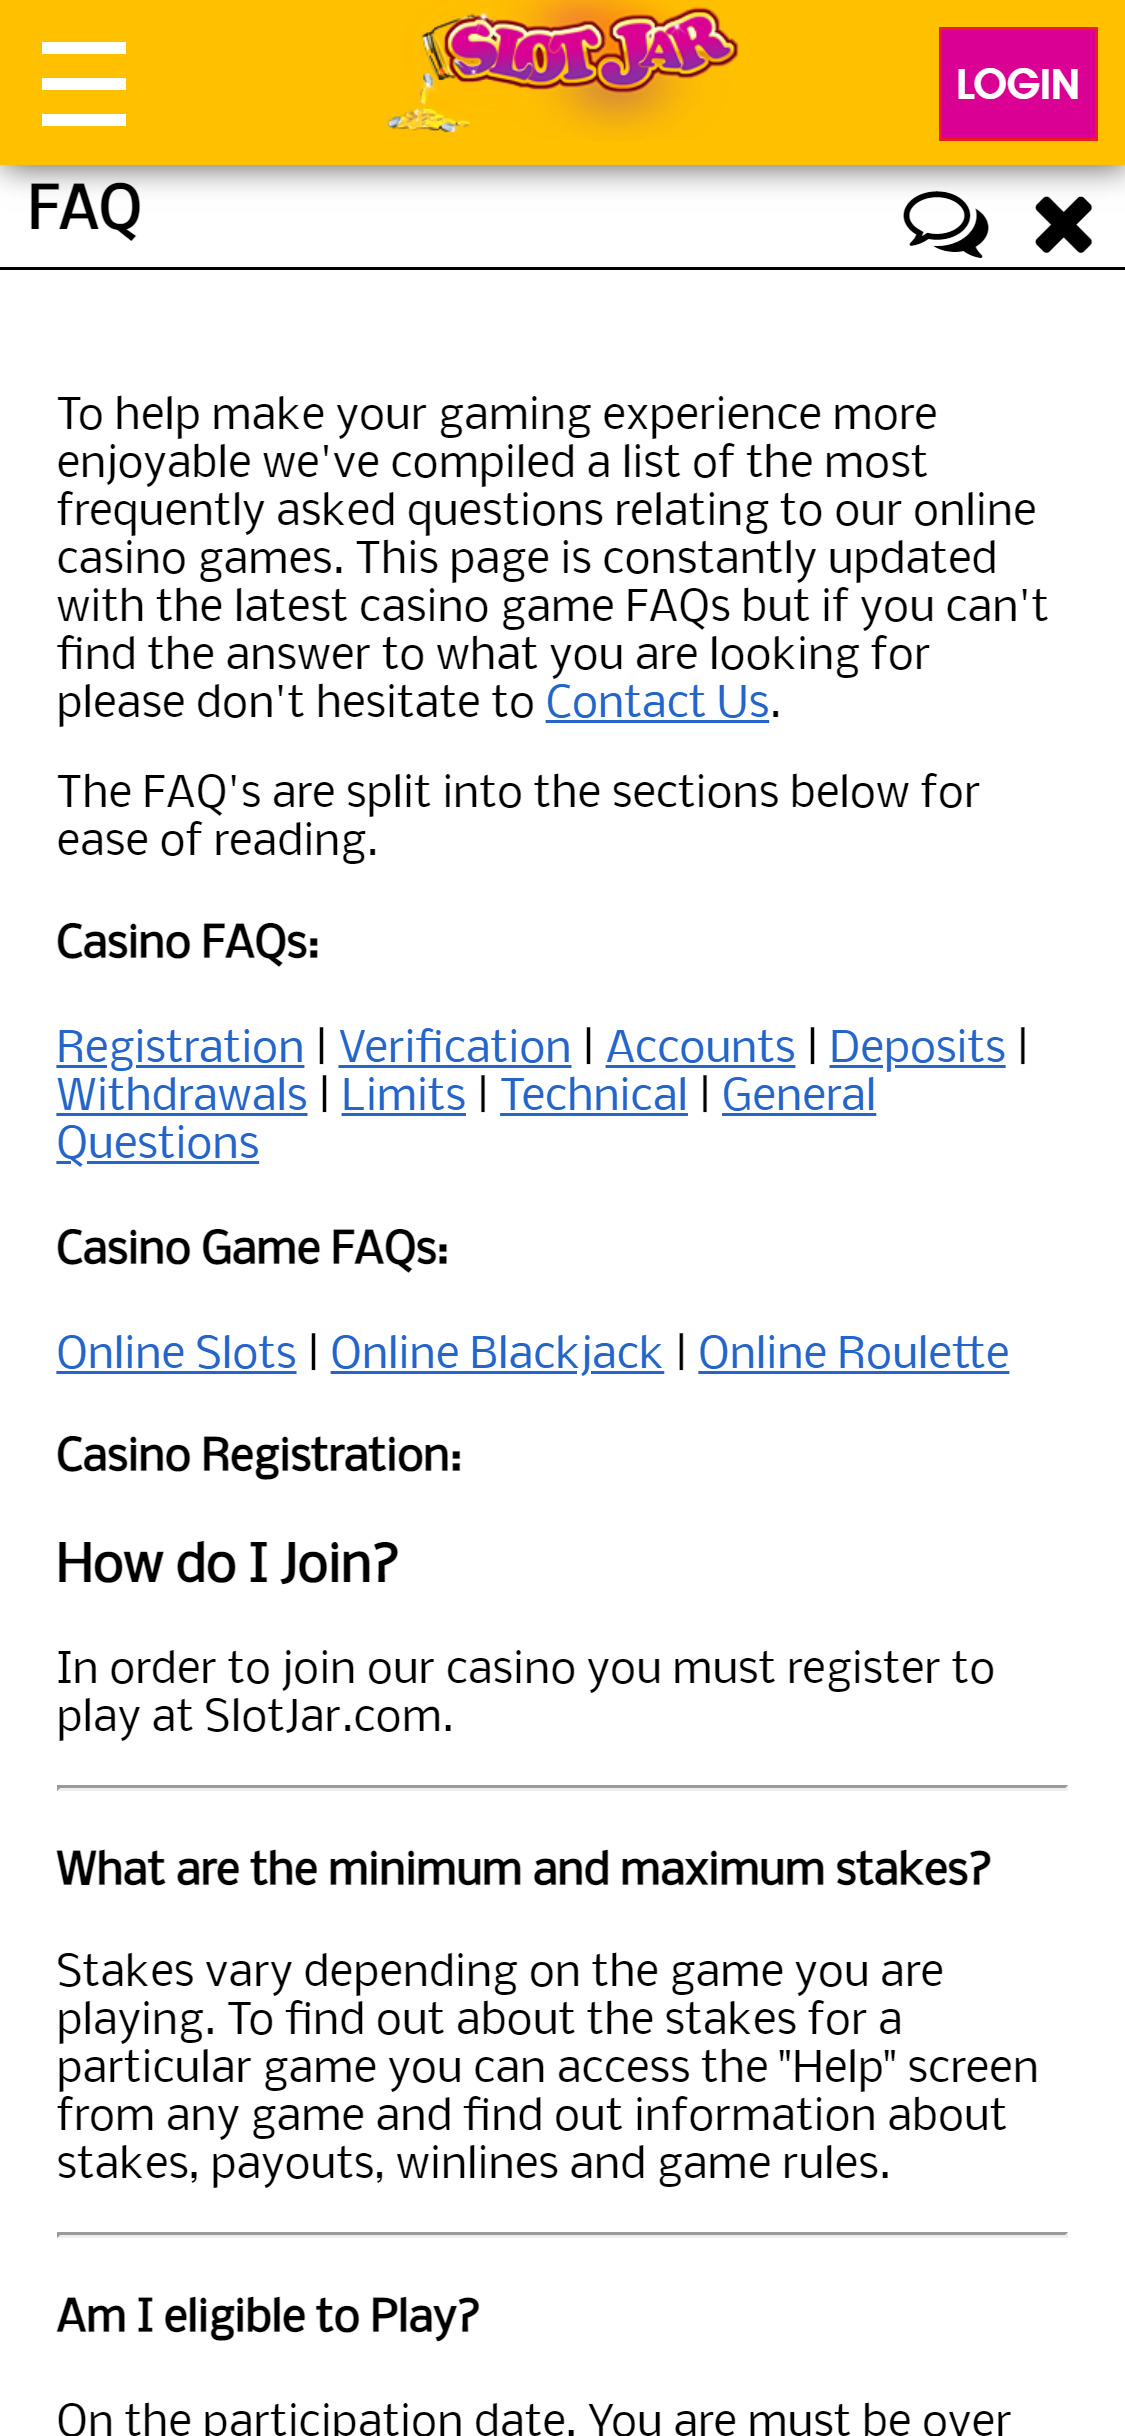 Slot Jar Casino Mobile Support Review